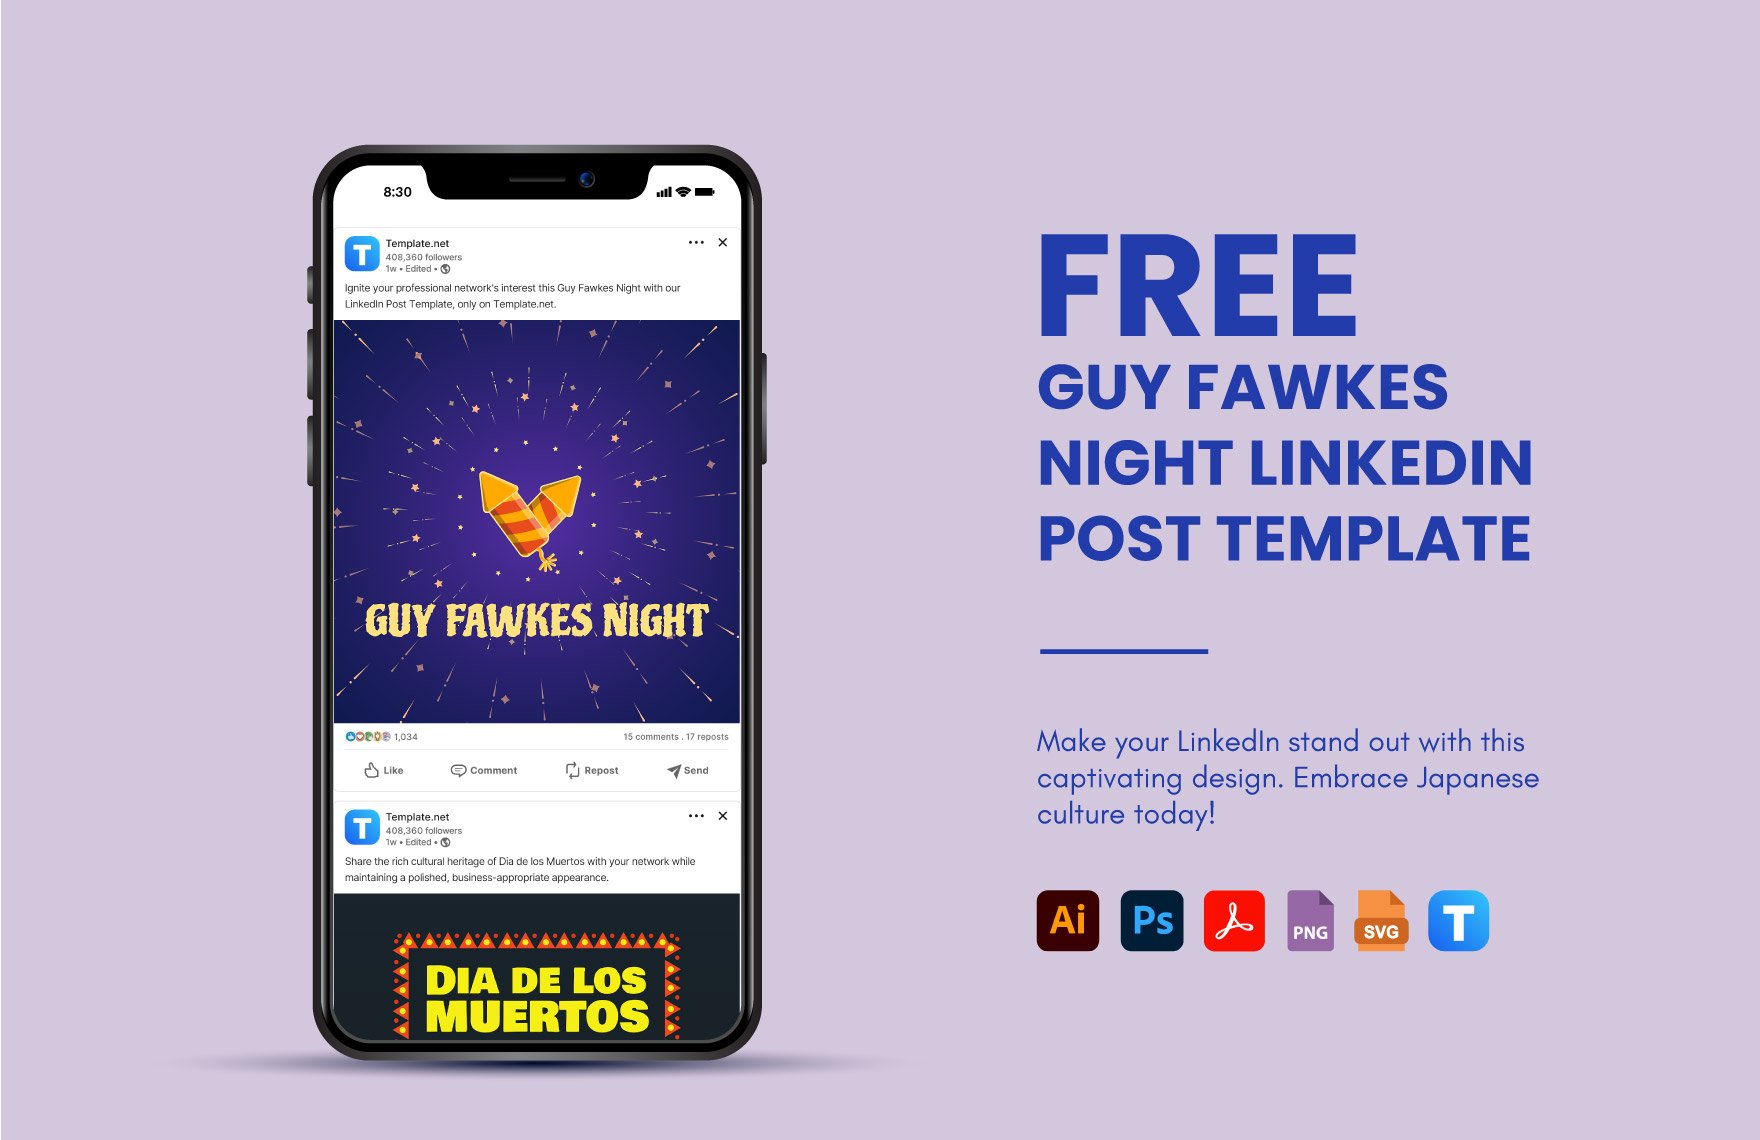 Free Guy Fawkes Night LinkedIn Post Template in PDF, Illustrator, PSD, SVG, PNG